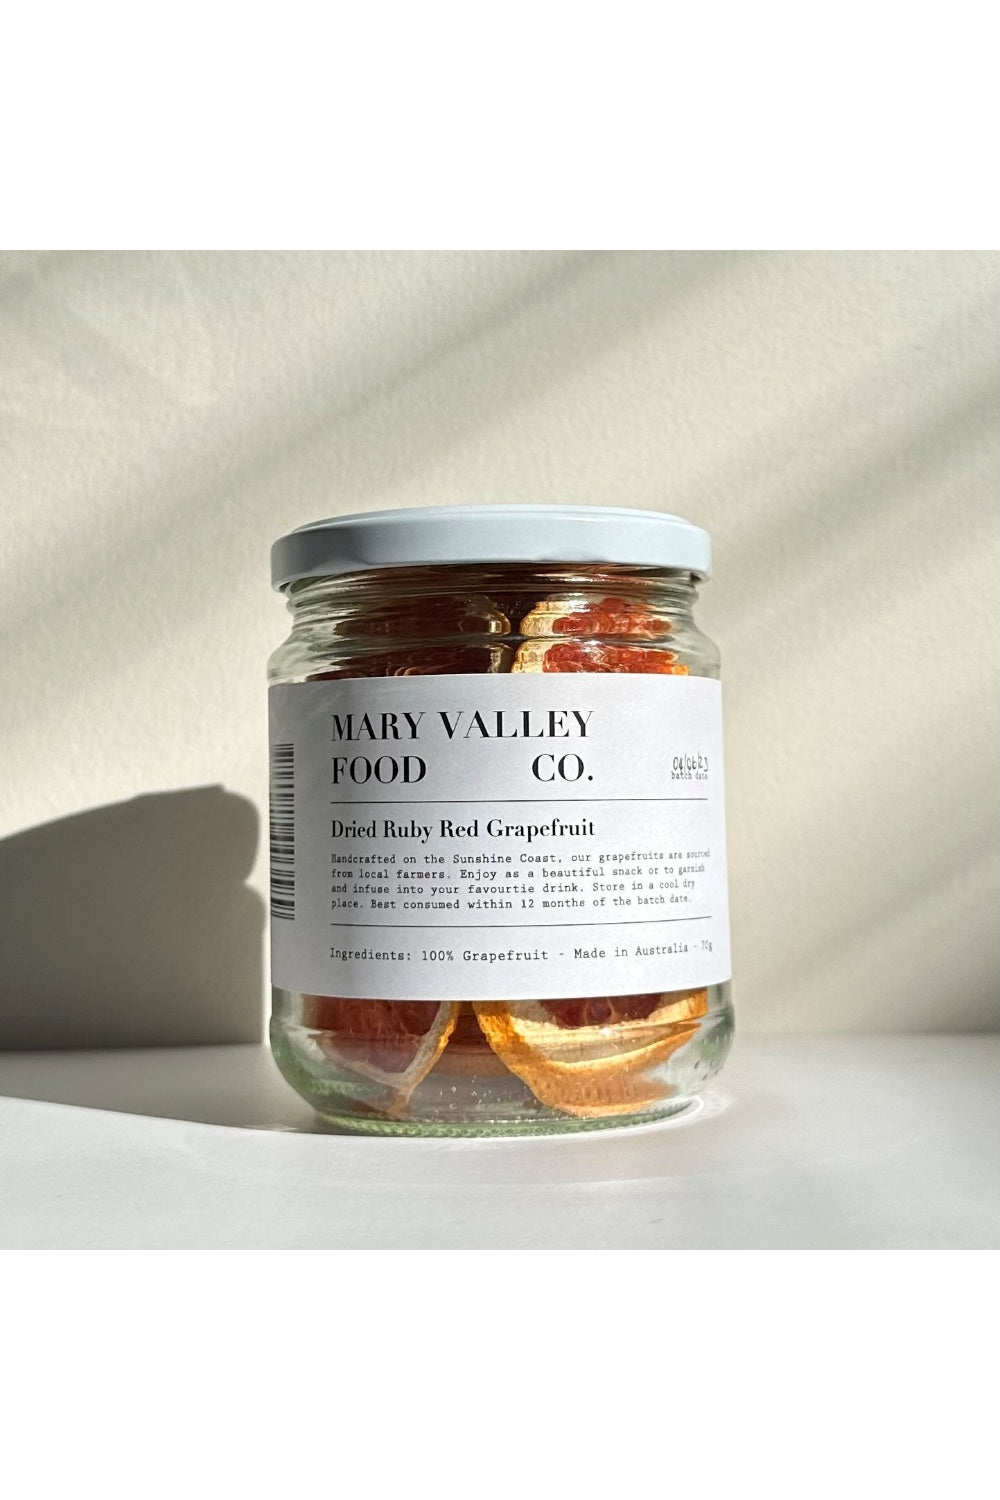 MARY VALLEY FOOD CO. DRIED RUBY RED GRAPEFRUIT